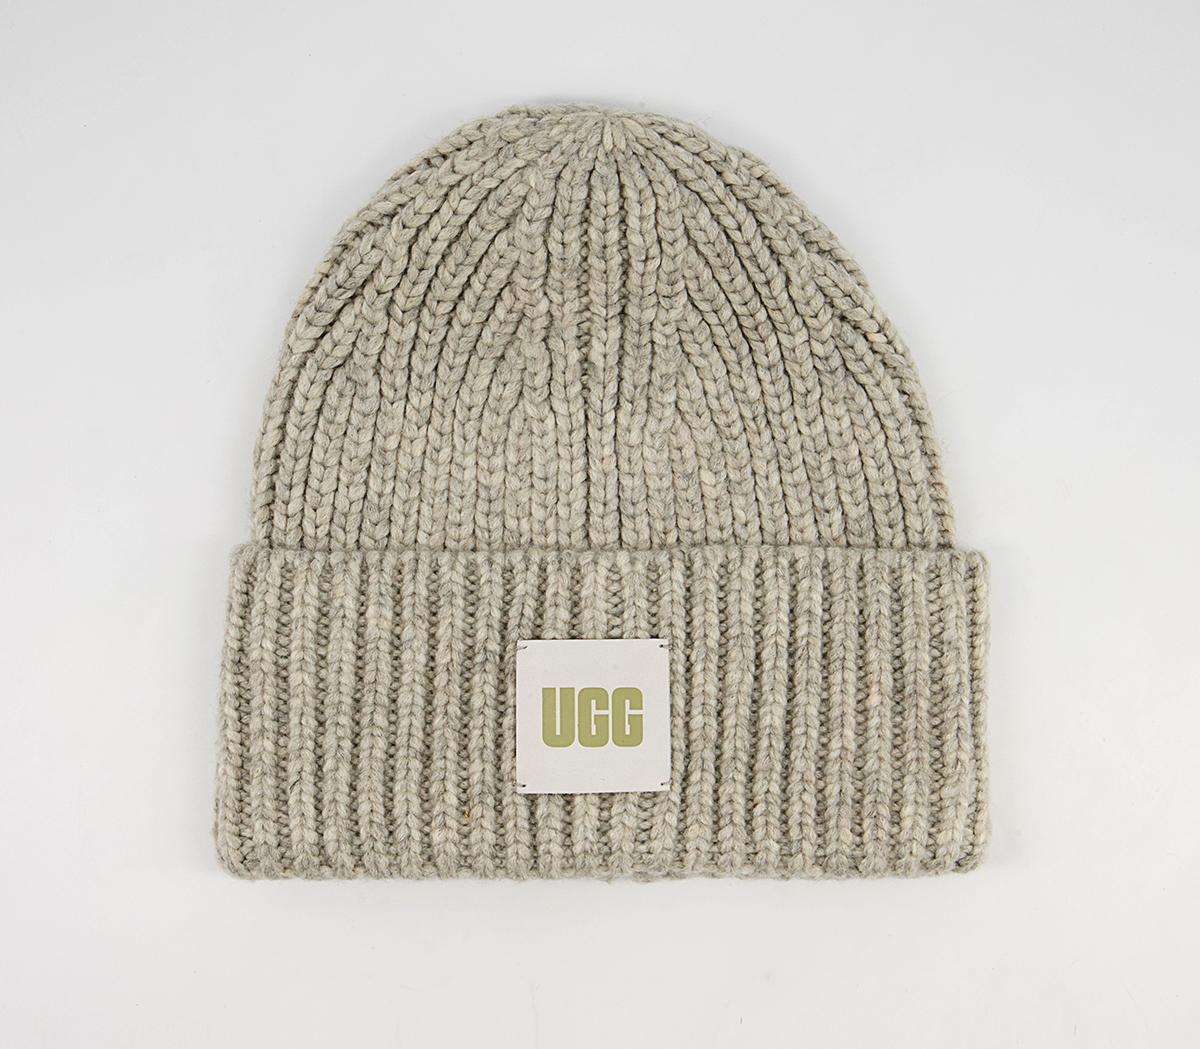 UGG Knit Hat & Scarf Set Grey - Caps And Hats